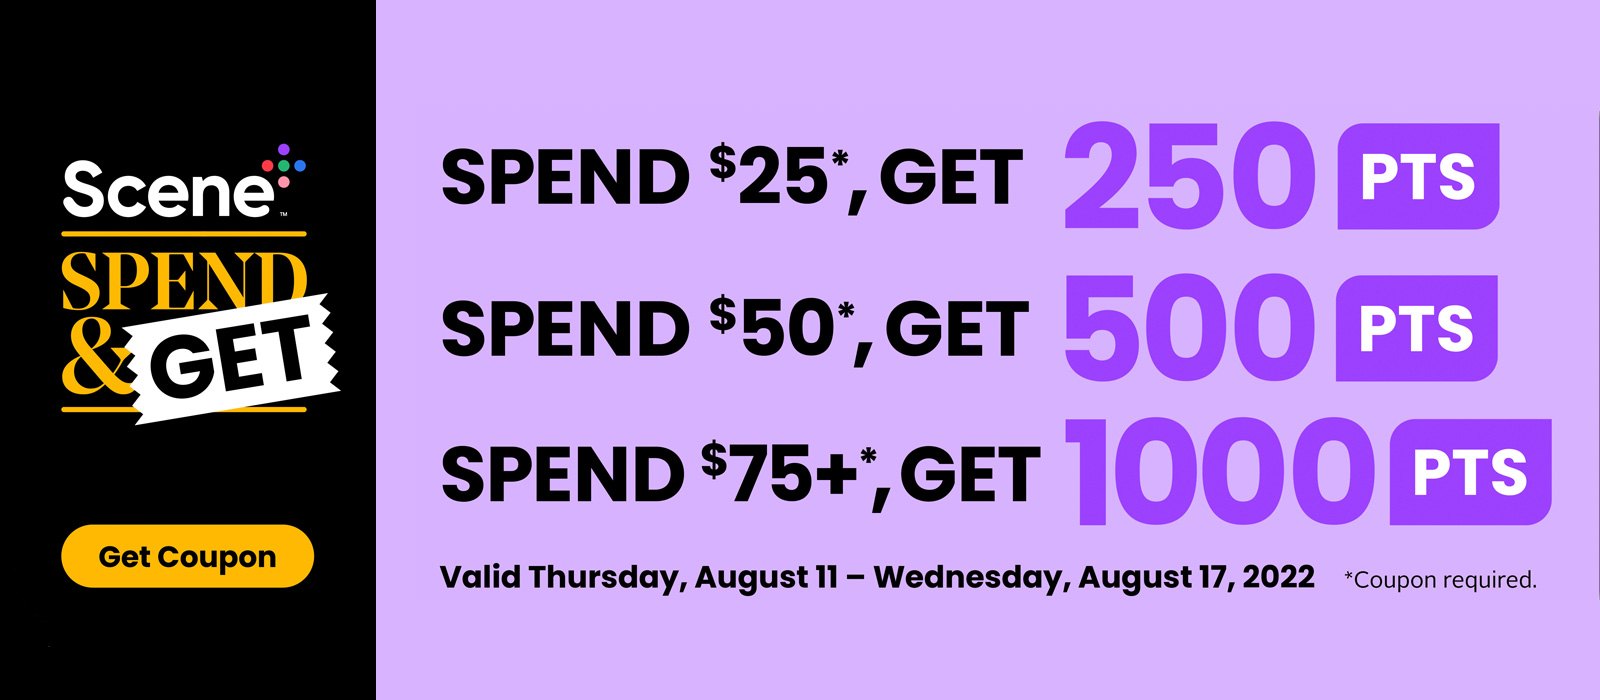 Text Reading 'Scene Spend & Get Offers. Spend $25 and get 50 points. Spend $50 and get 500 points. Spend $75+ and get 1000 points. Offer valid till Thursday, August 11 to Wednesday, August 17, 2022. 'Get coupon' from the button given on the left side of the banner.'